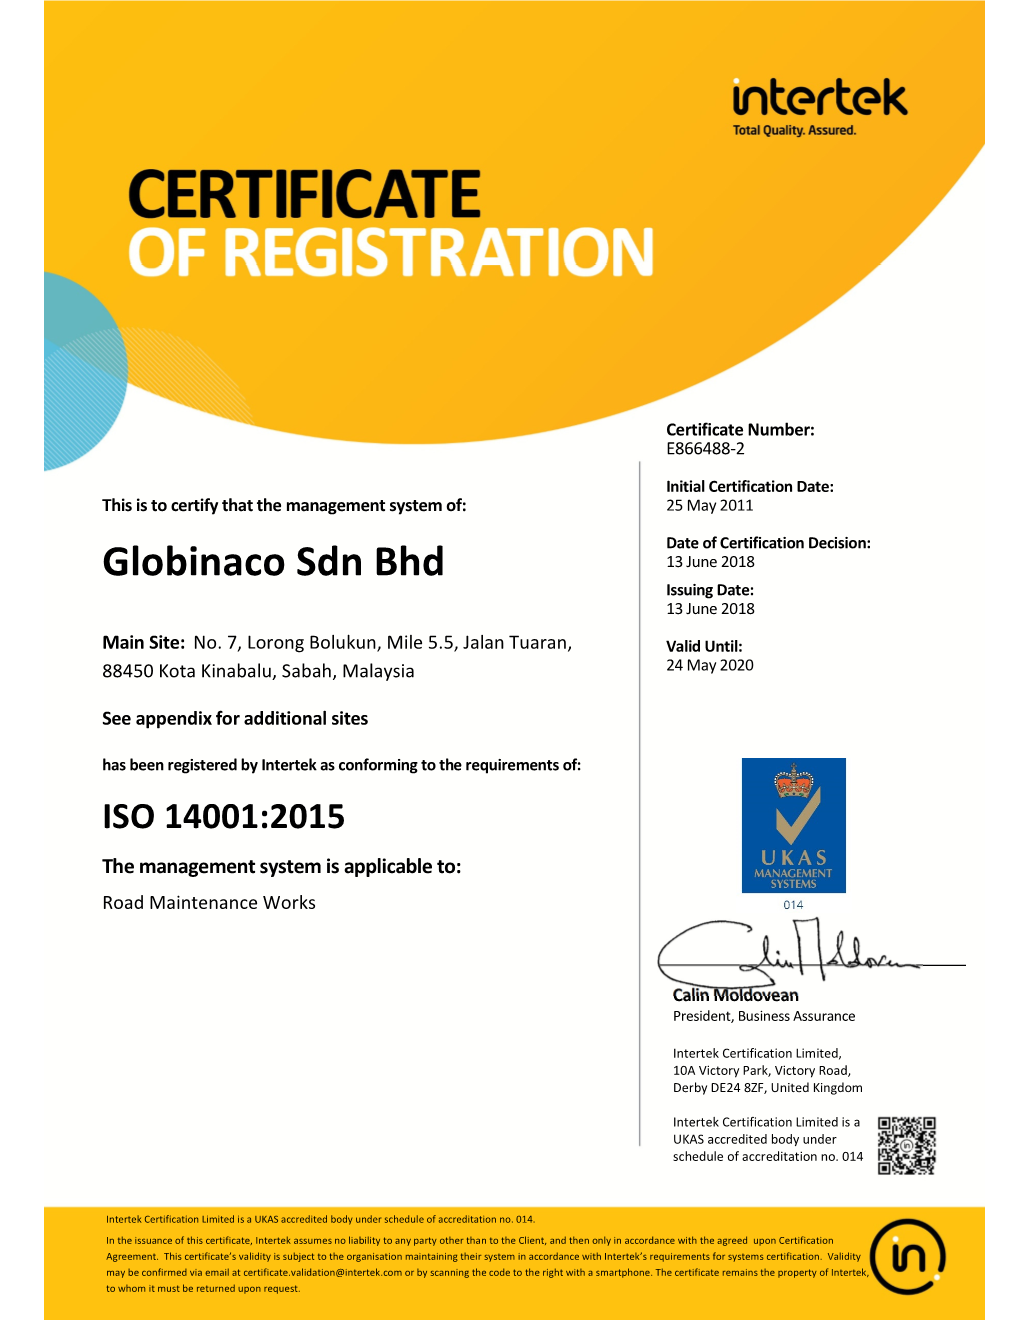 Globinaco Sdn Bhd Issuing Date: 13 June 2018